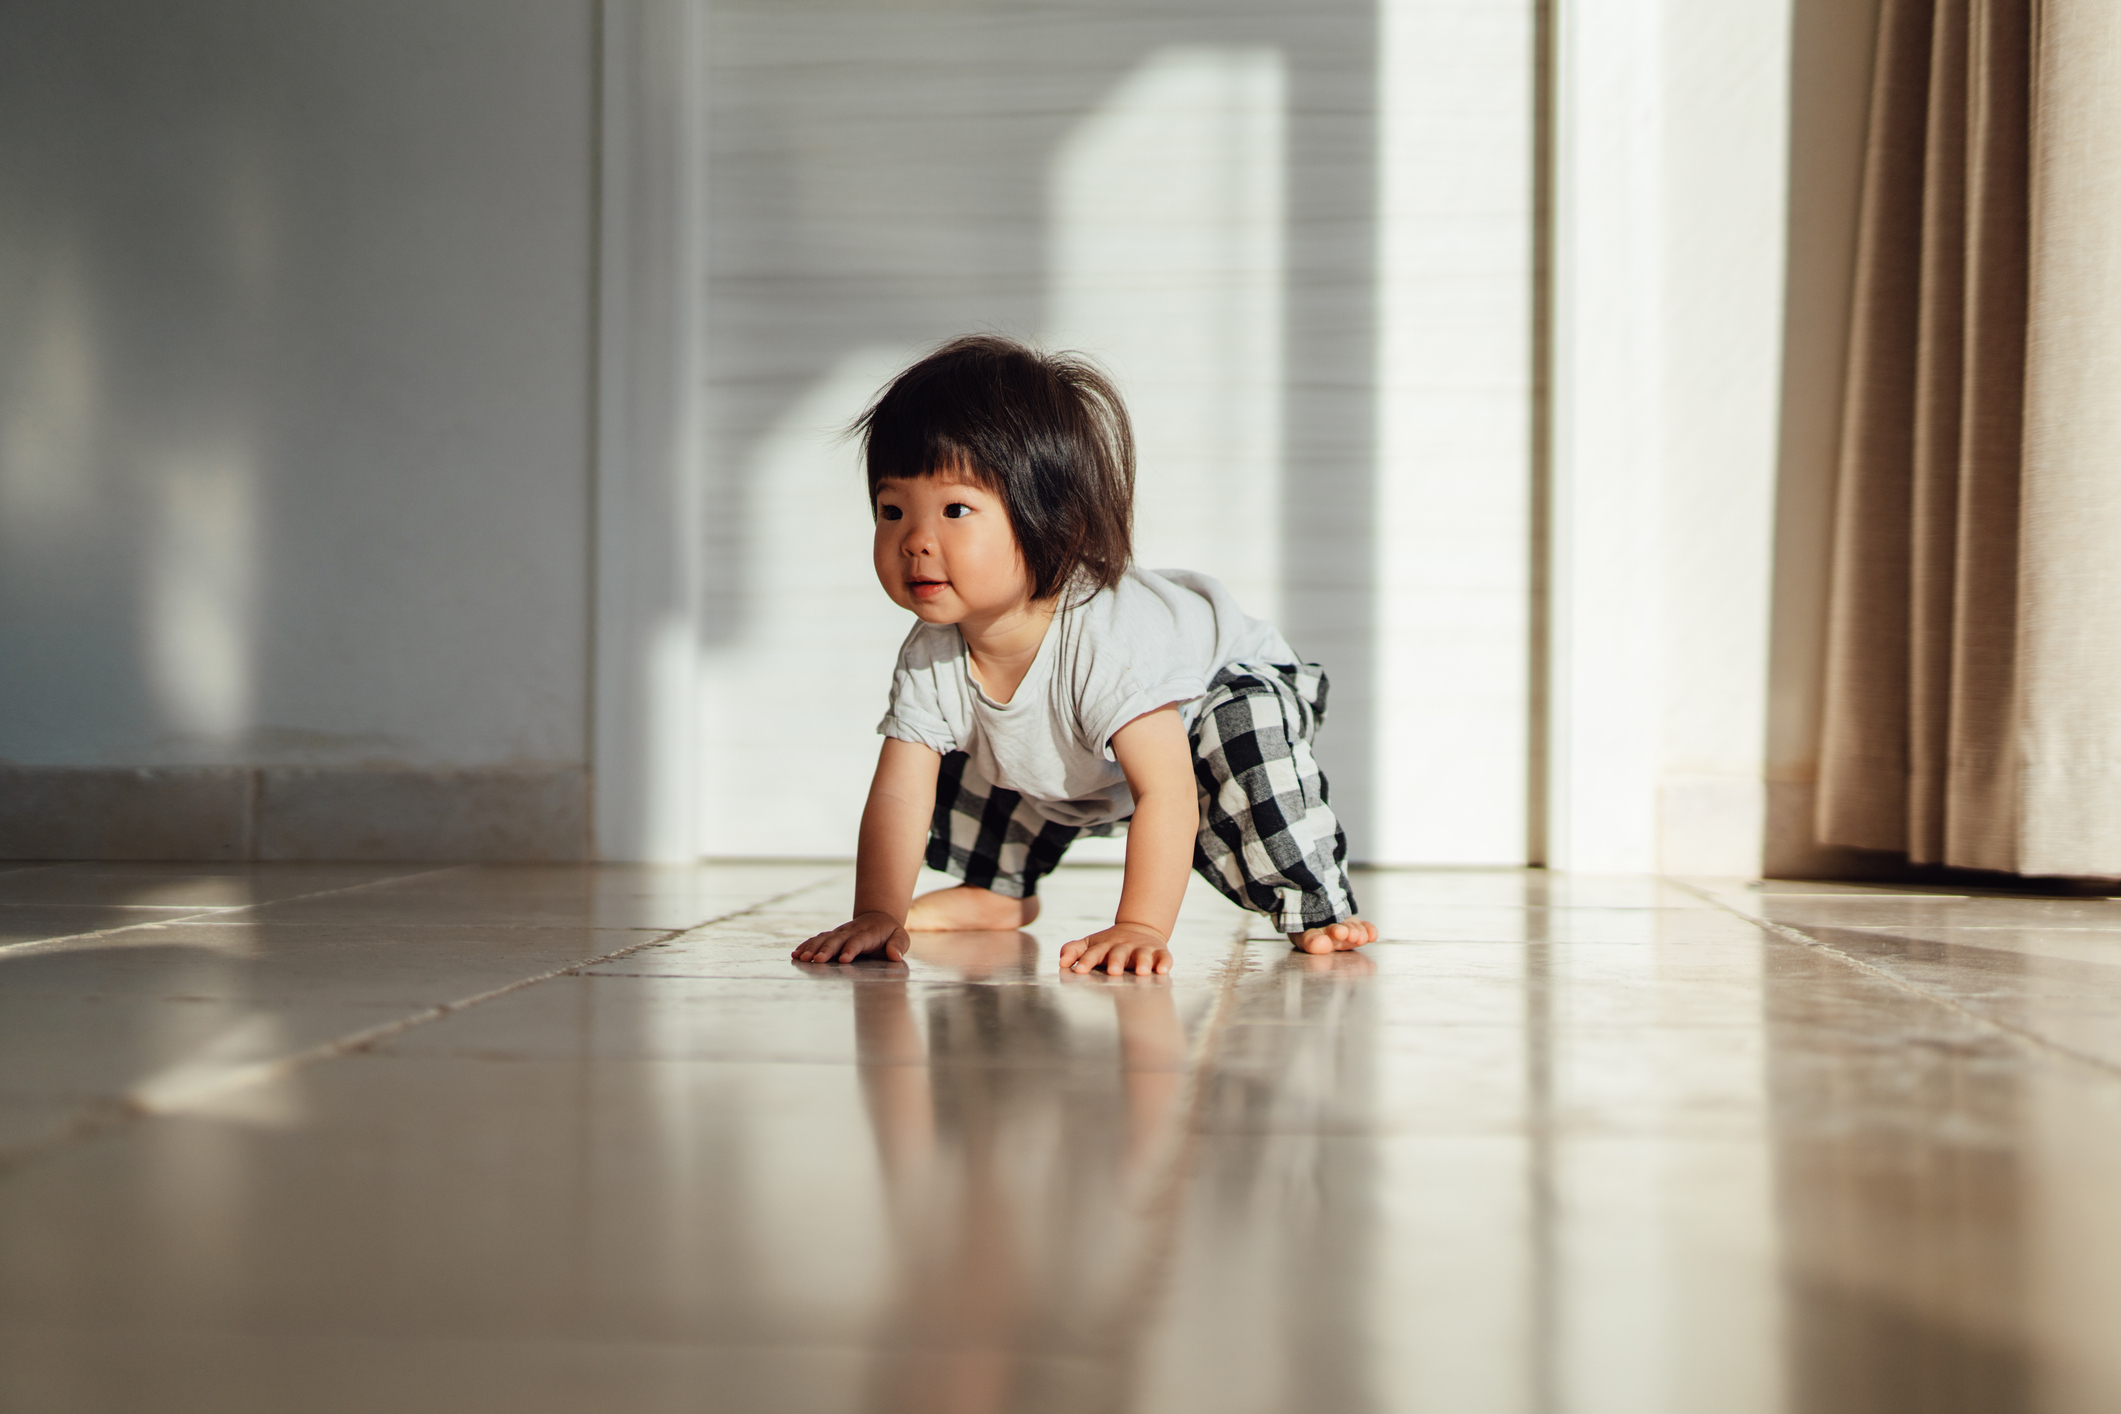 Toddler crouching on a tiled floor with sunlight streaming in, looking to the side